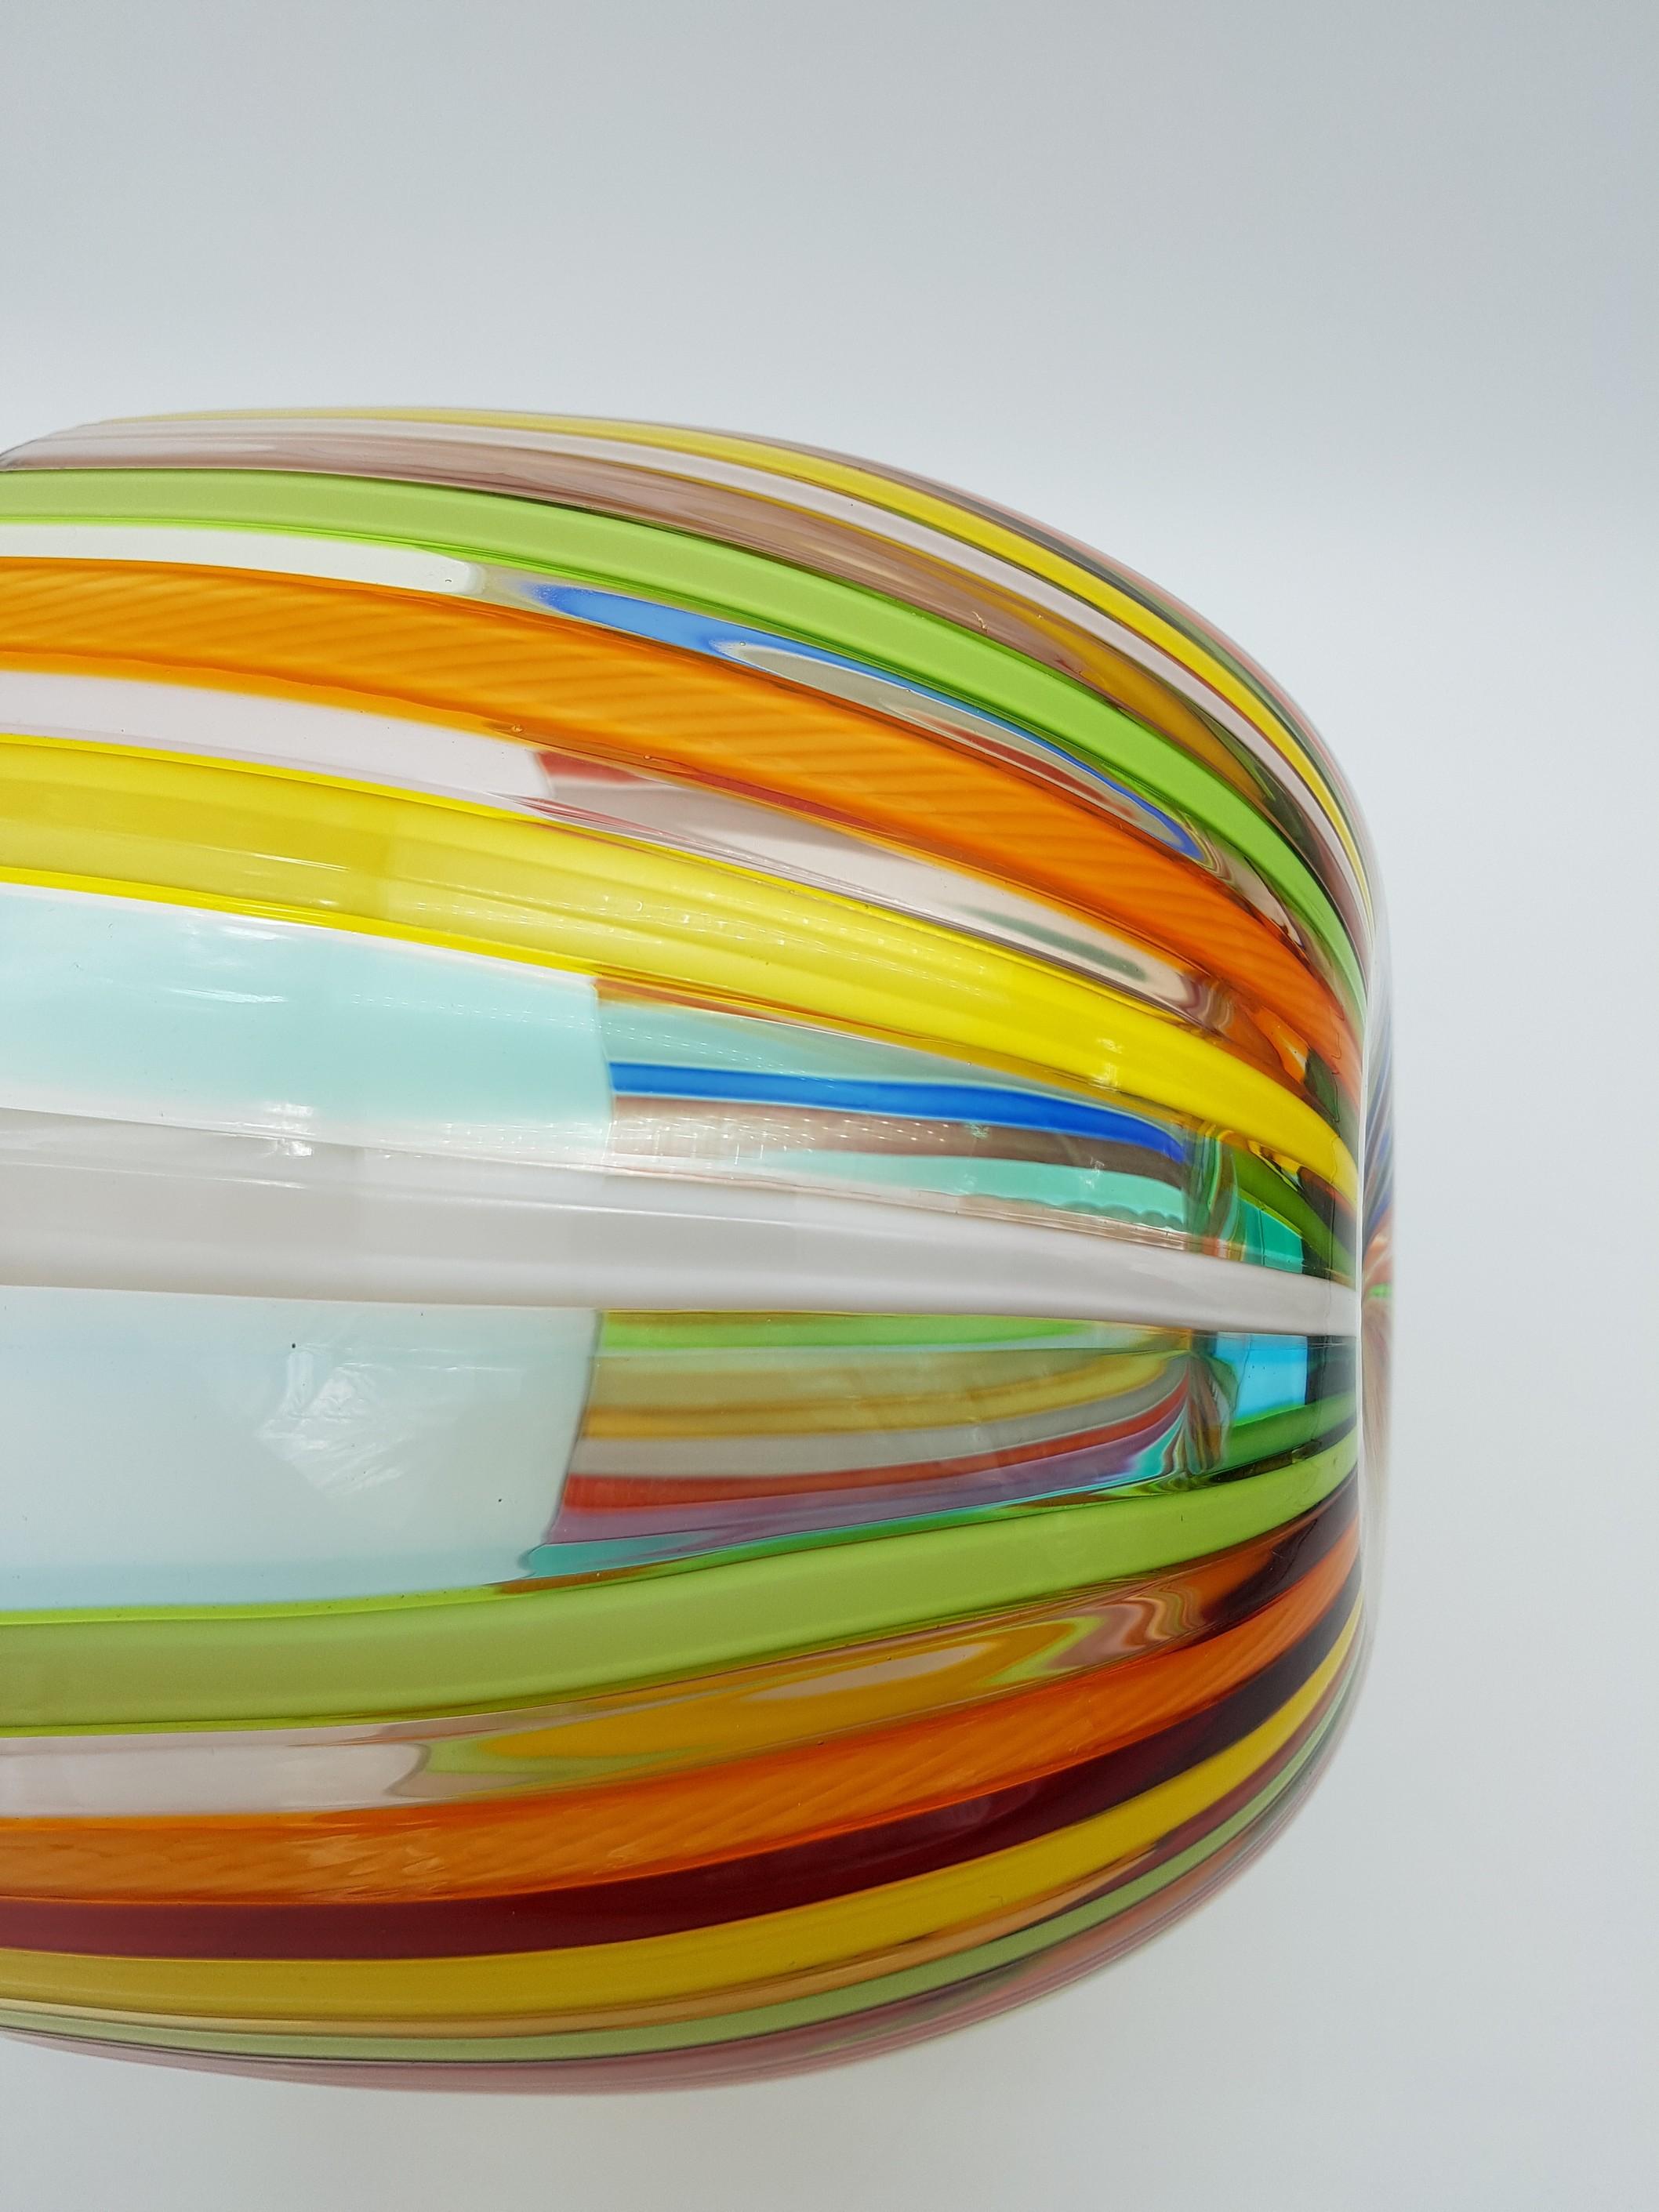 Late 20th Century Modern Murano Glass Bowl Centerpiece, Bright Rainbow Colors by Cenedese, 1998 For Sale